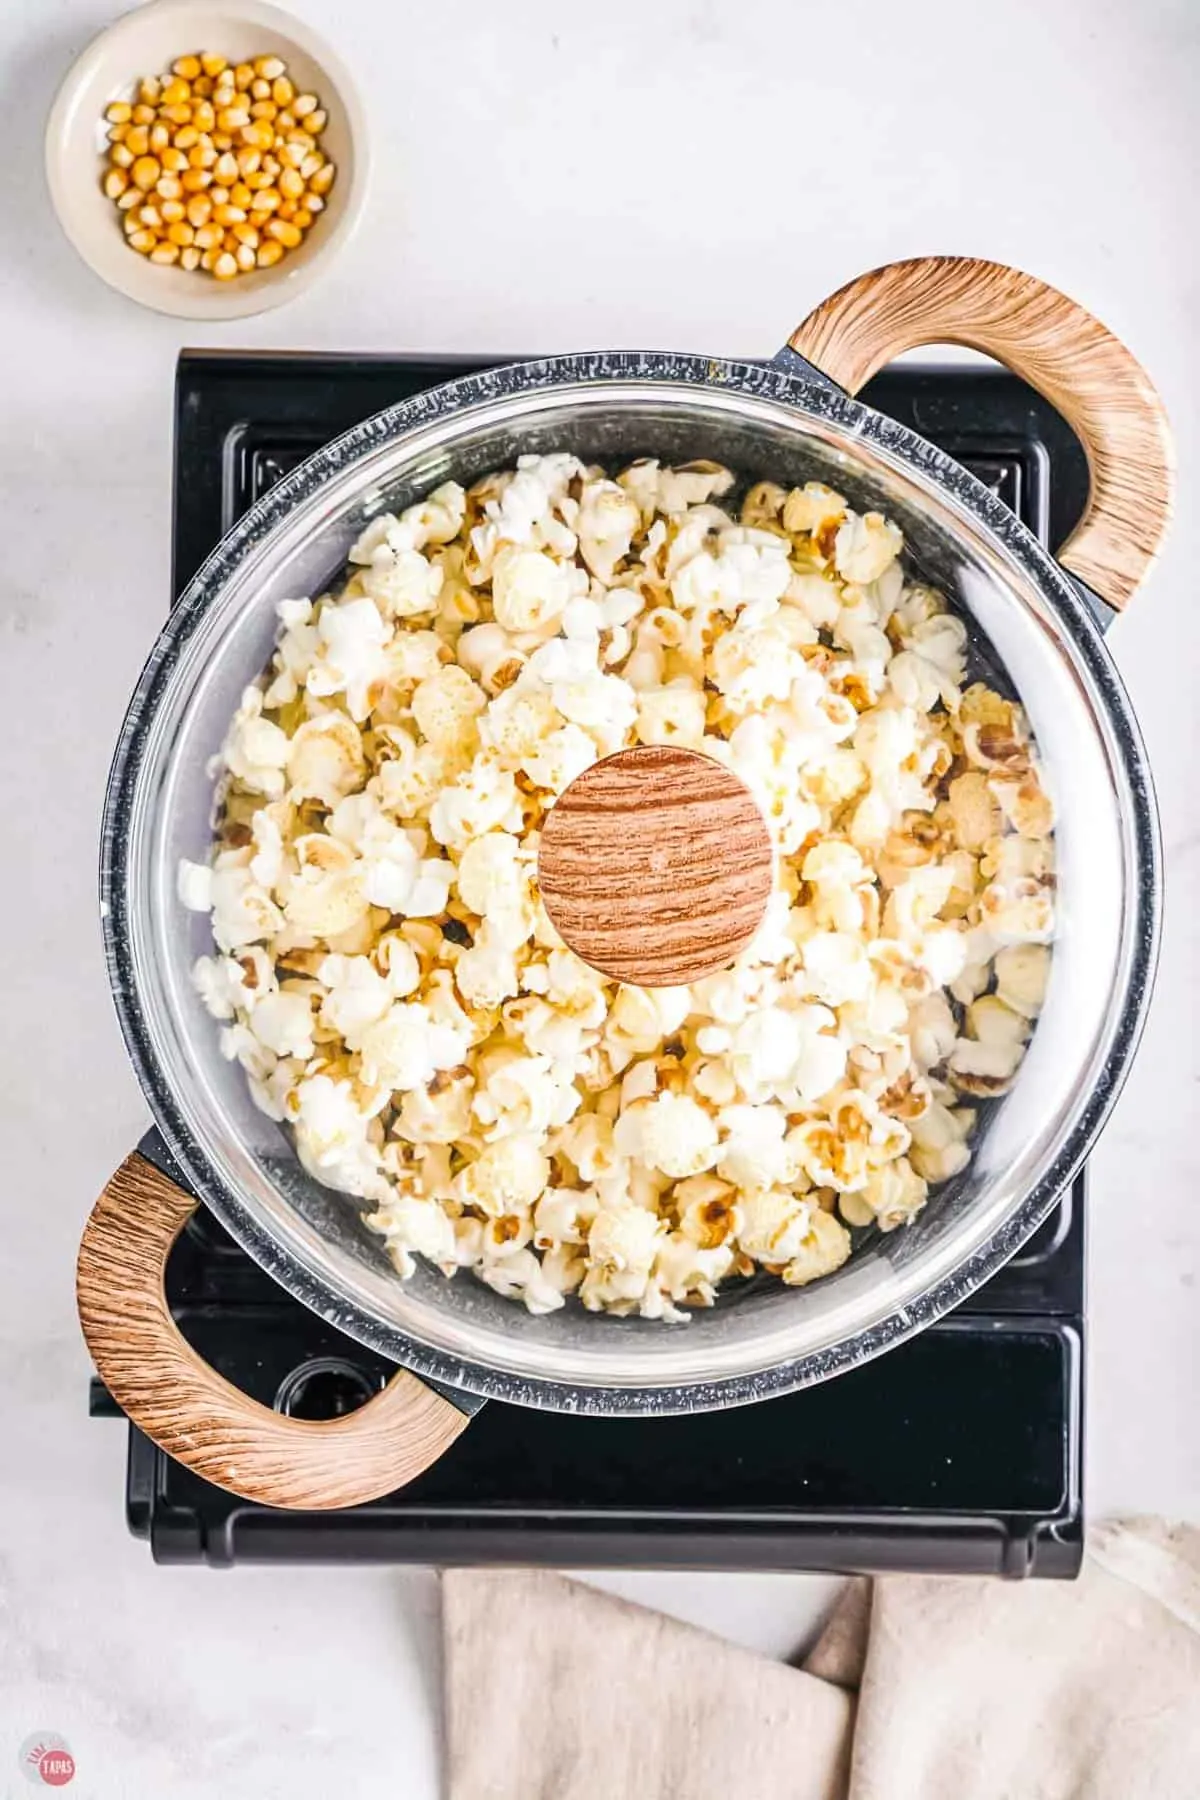 white kernels are the best choice for this recipe